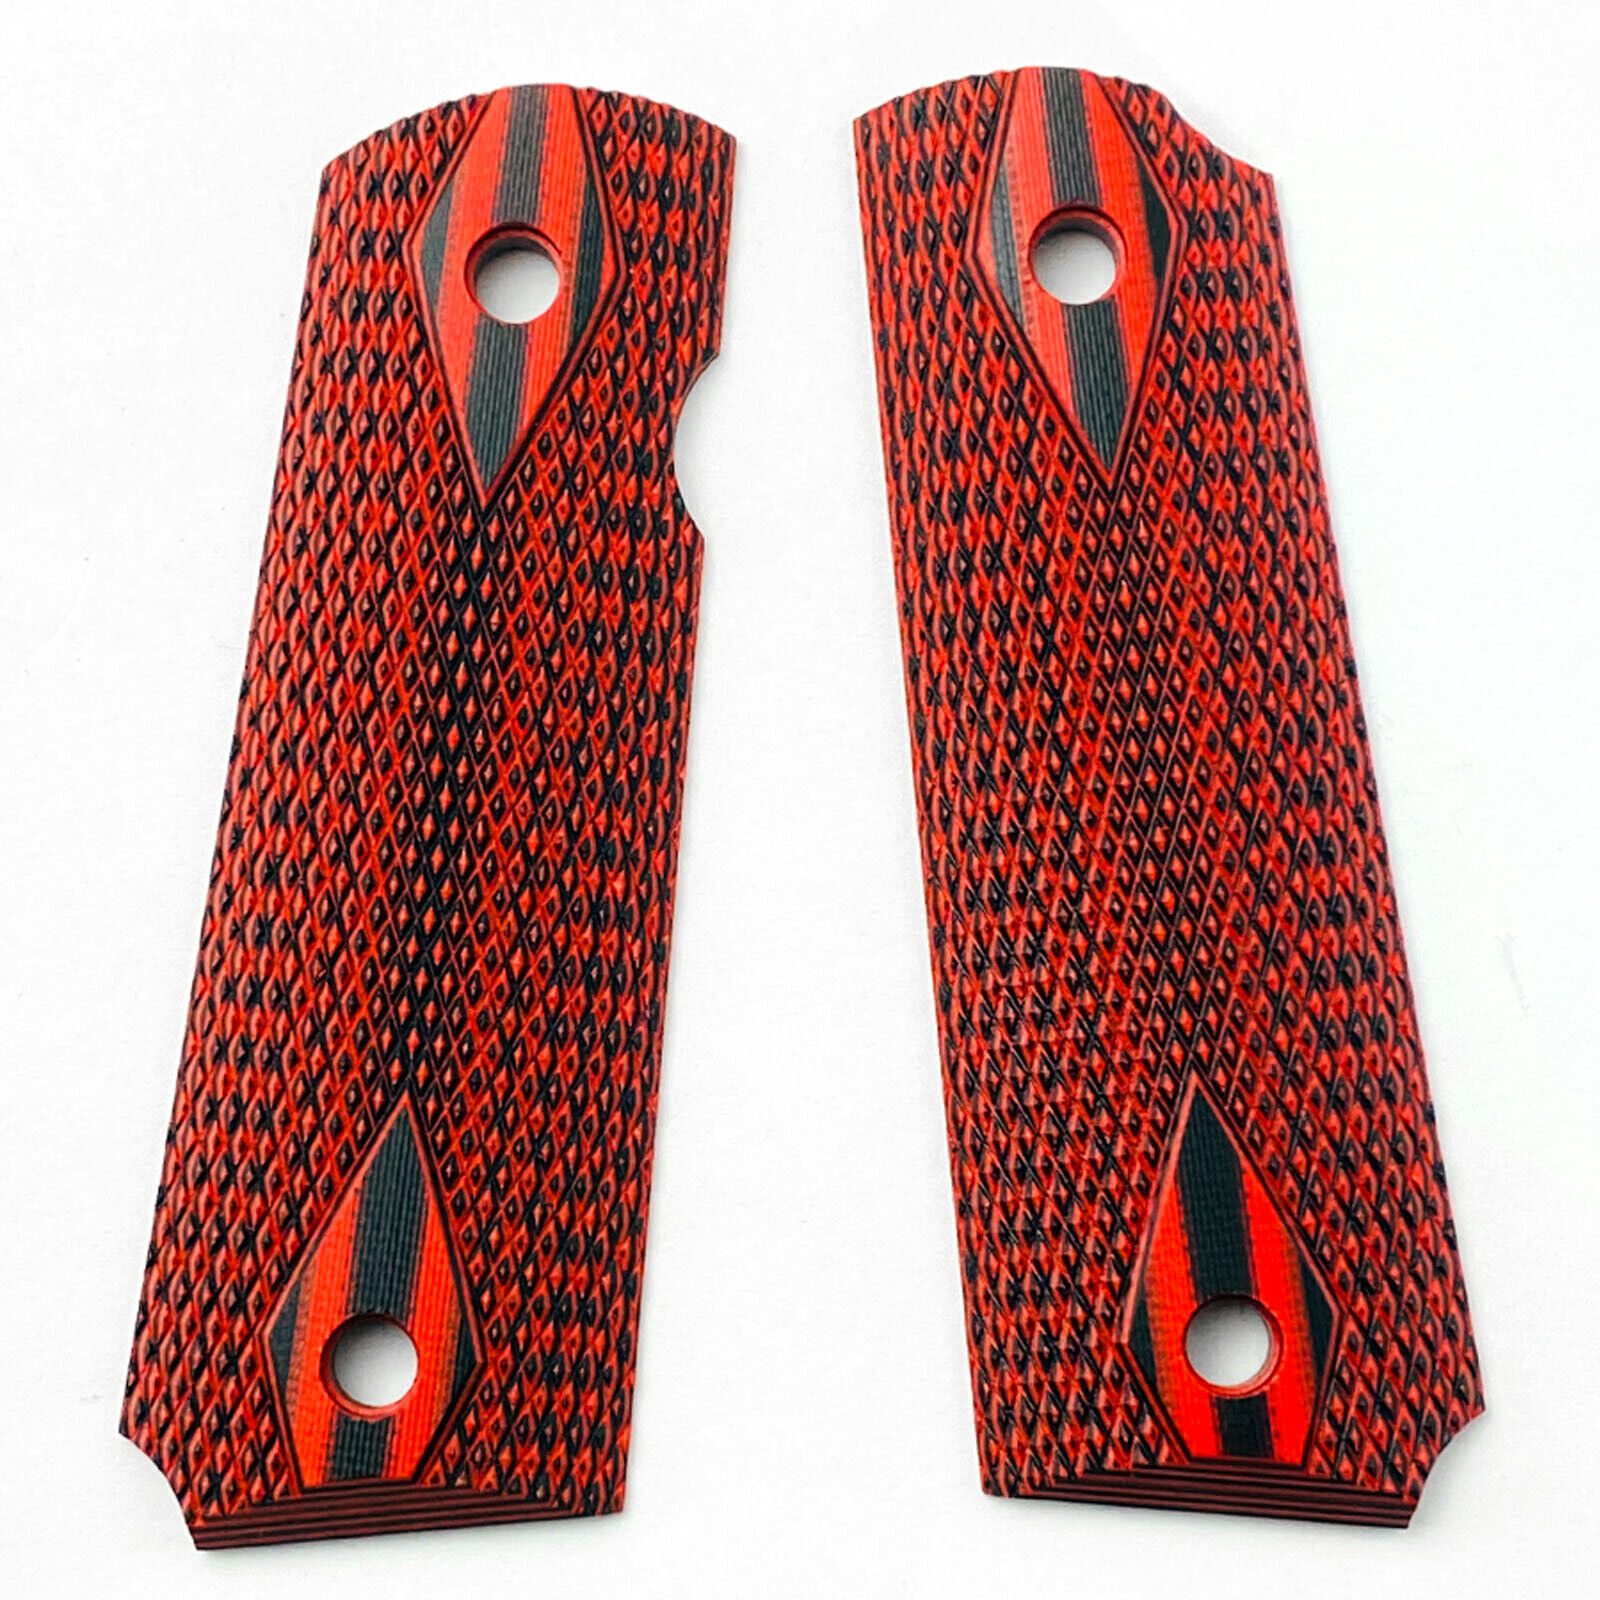 1 Pair Tactics 1911 Grips Red G10 Handle Patch Material Custom CNC Accessories